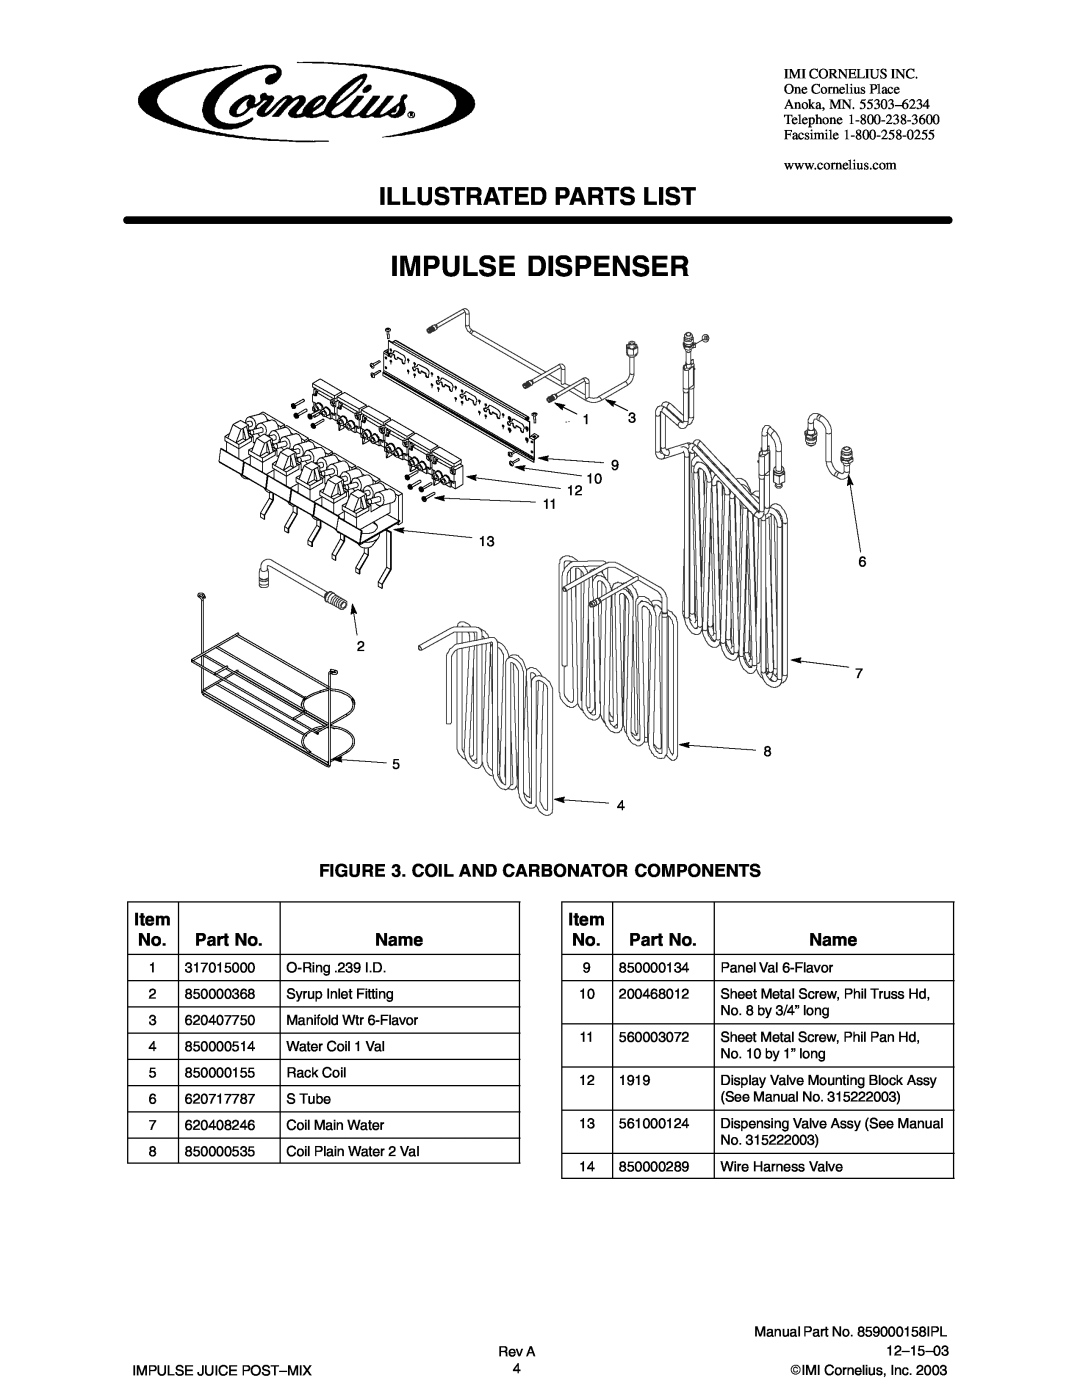 Panasonic 851000321, 851000110, 851000319 Impulse Dispenser, Illustrated Parts List, Coil And Carbonator Components, Name 